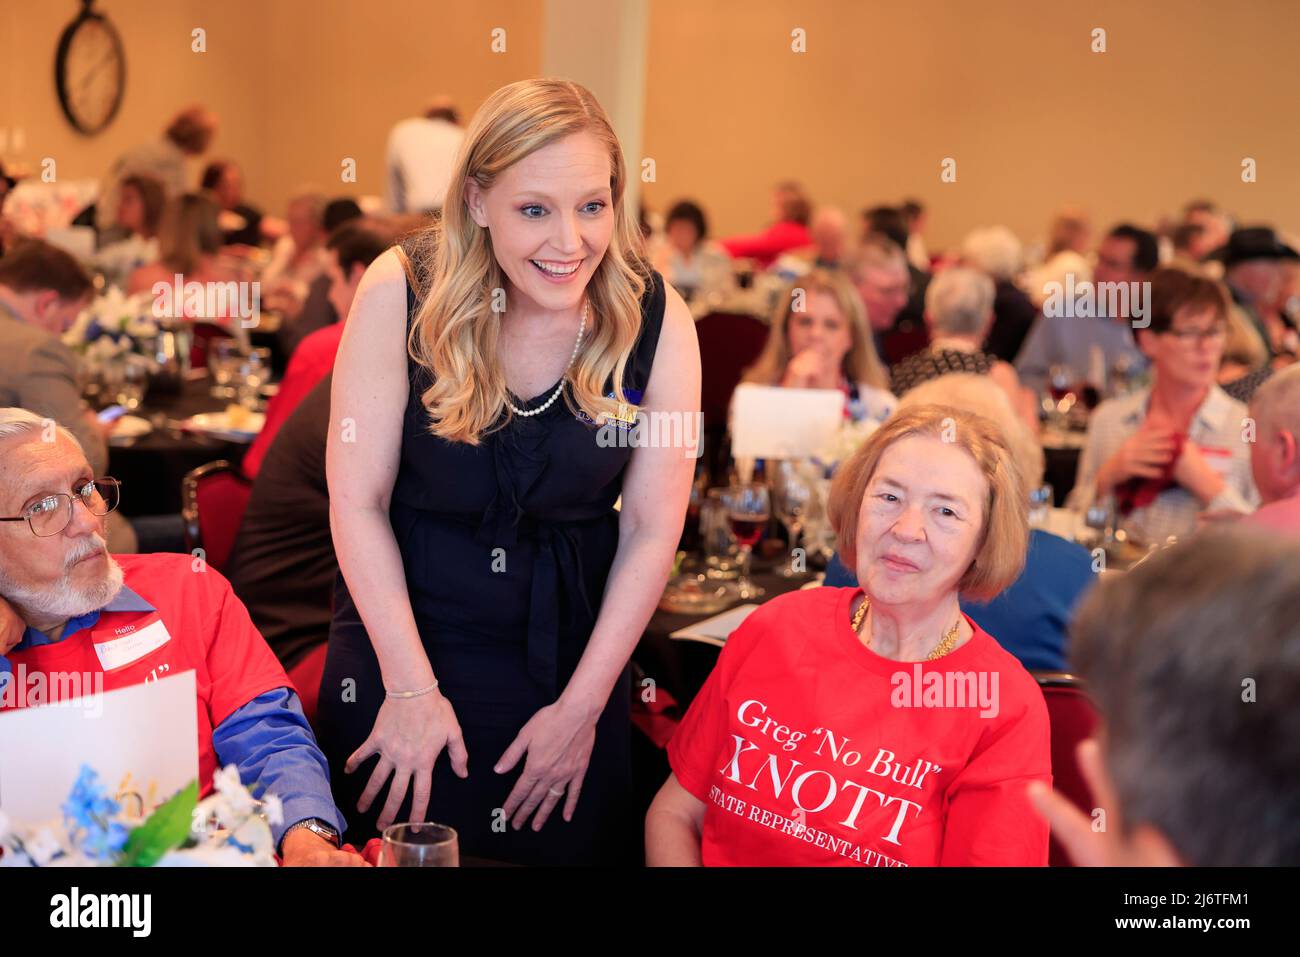 Indiana 9th District Republican candidate Erin Houchin greets potential constituents during the Monroe County Republican Party 2022 Lincoln Day Dinner in Bloomington. Houchin won the Republican primary Tuesday night and will face Democrat Matt Fyfe, from Bloomington, in the fall midterm election. Houchin refers to herself as a “Trump Conservative.” (Photo by Jeremy Hogan / SOPA Images/Sipa USA) Stock Photo